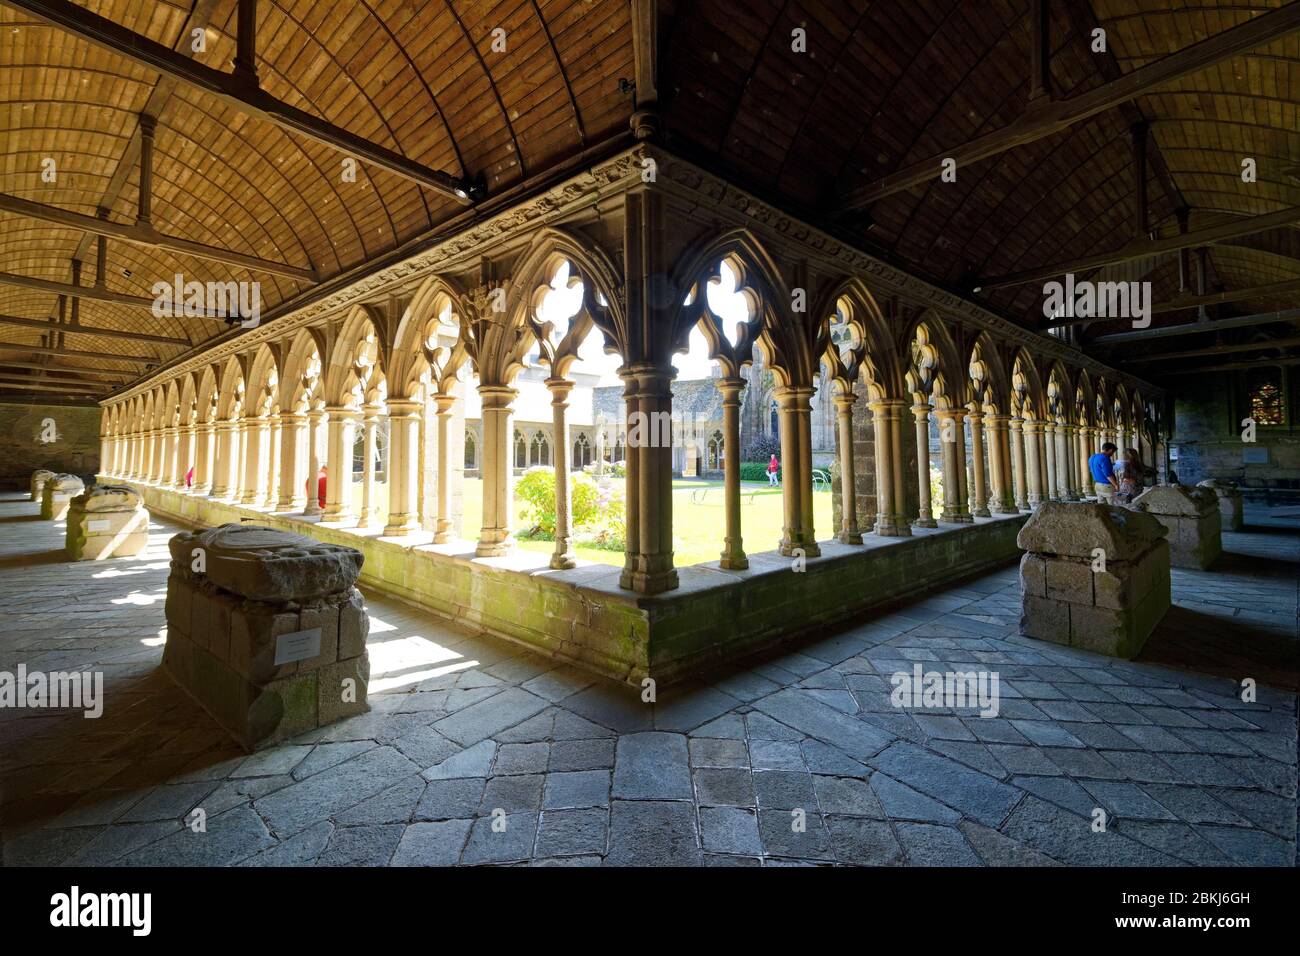 France, Cotes d'Armor, Treguier, Saint-Tugdual cathedral, the cloister in flamboyant gothic style from 1461 and recumbent statue Stock Photo